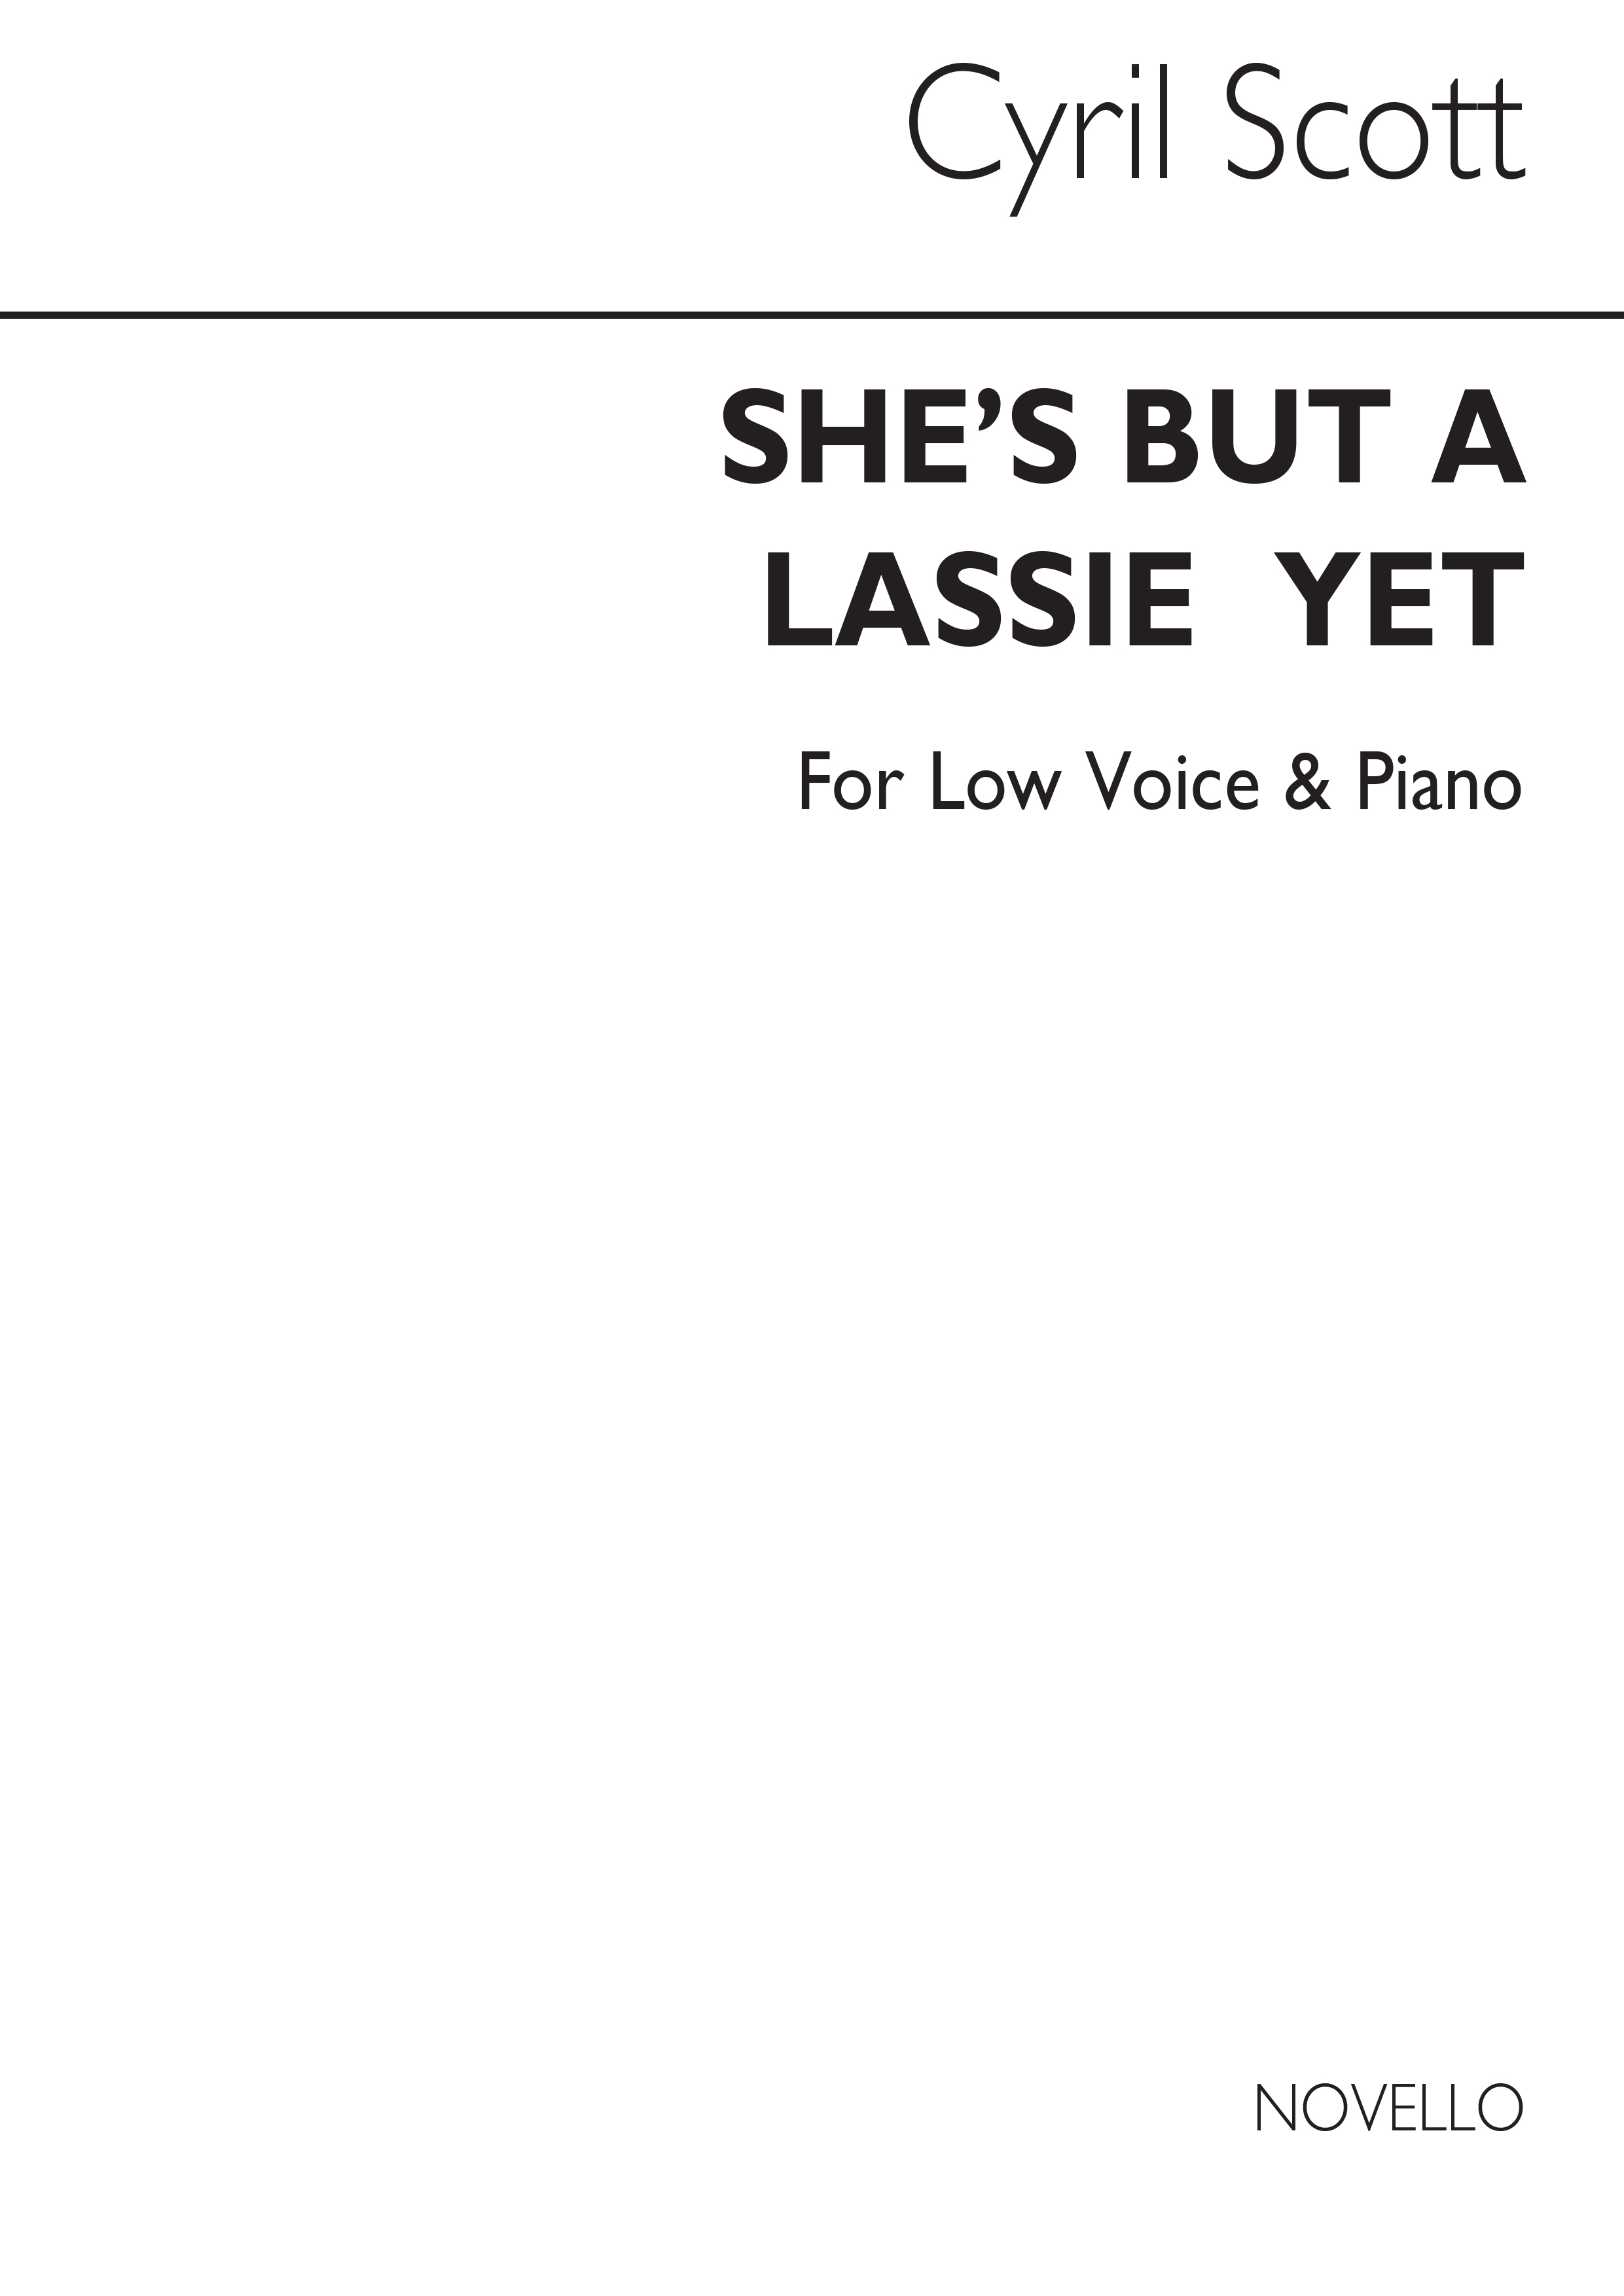 Cyril Scott: She's But A Lassie Yet-low Voice/Piano (Key-e Flat)